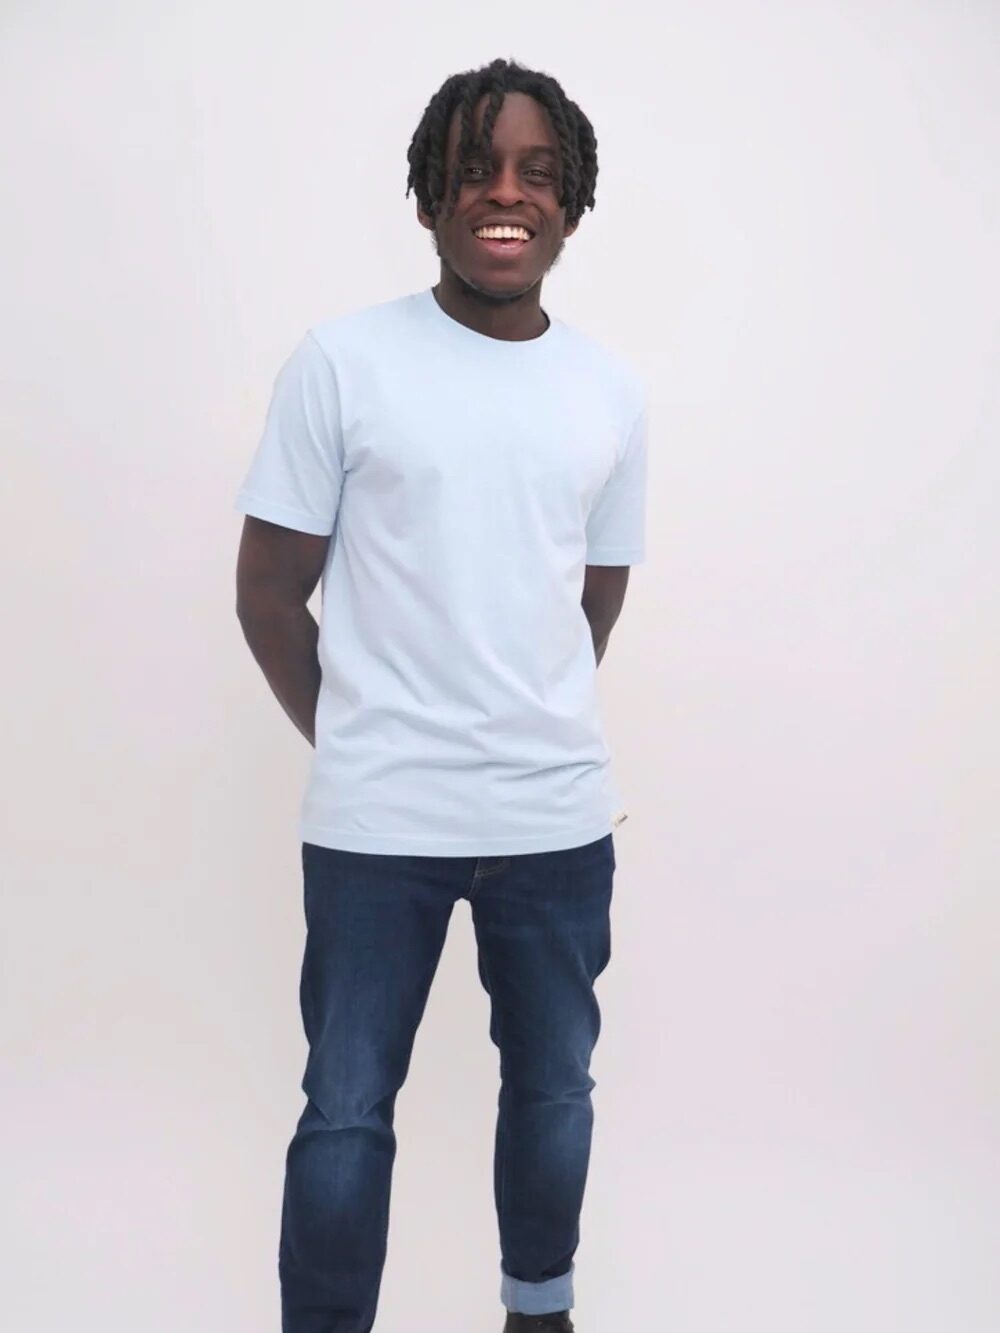 A young man in a white t-shirt and blue jeans stands smiling against a light background.